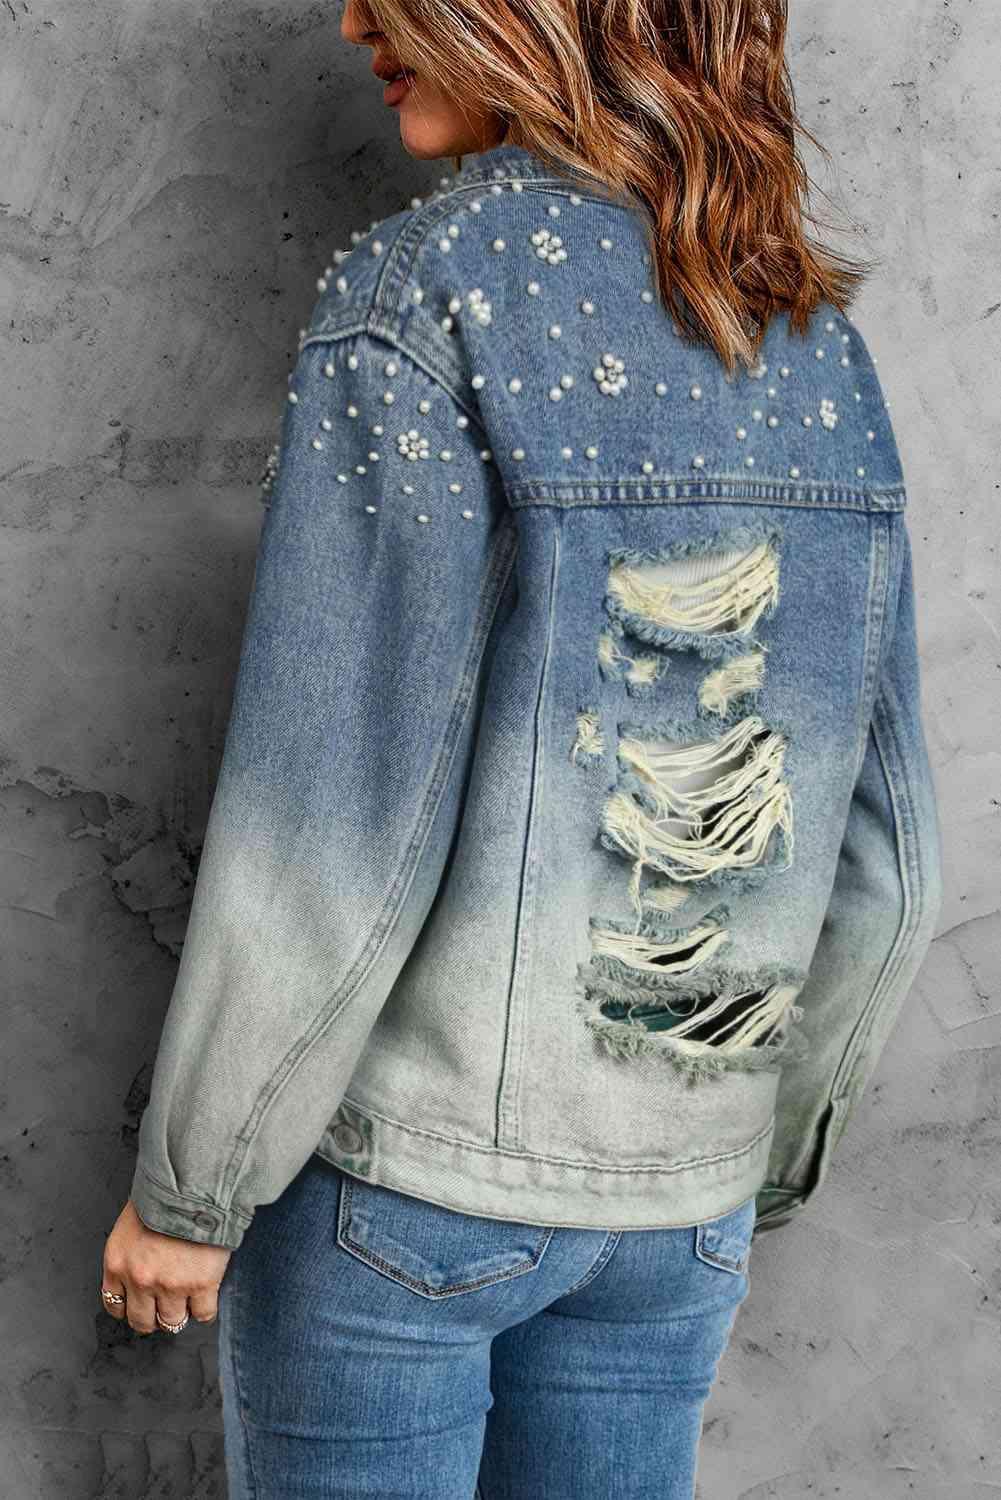 a woman wearing a denim jacket with studded details